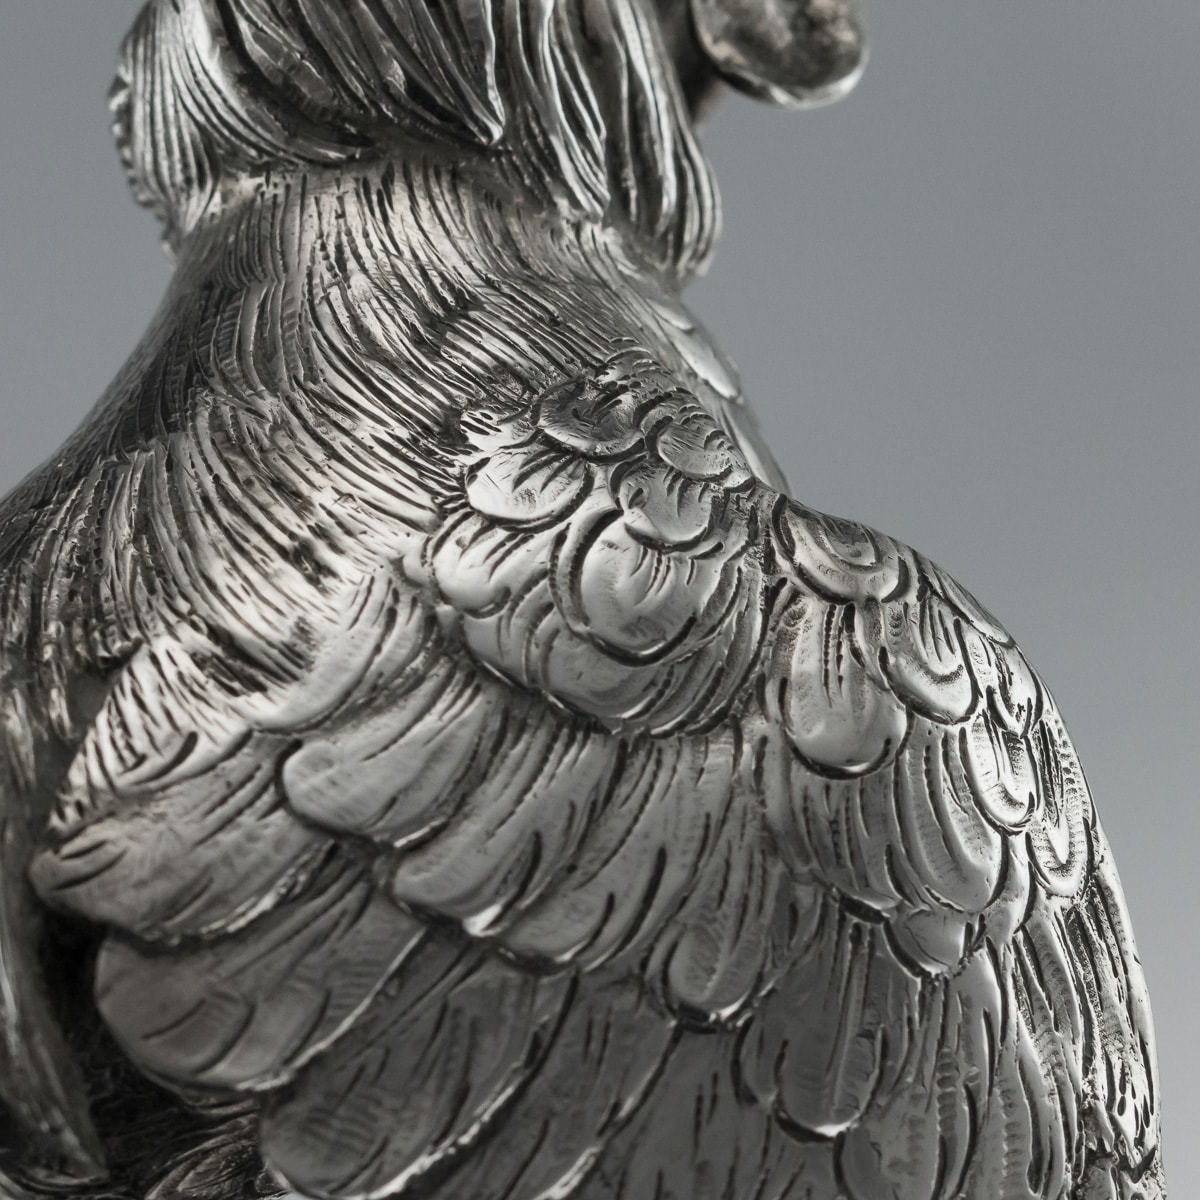 A PAIR OF GERMAN SILVER TABLE ORNAMENTS MODELLED AS FIGHTING COCKERELS - Image 30 of 41